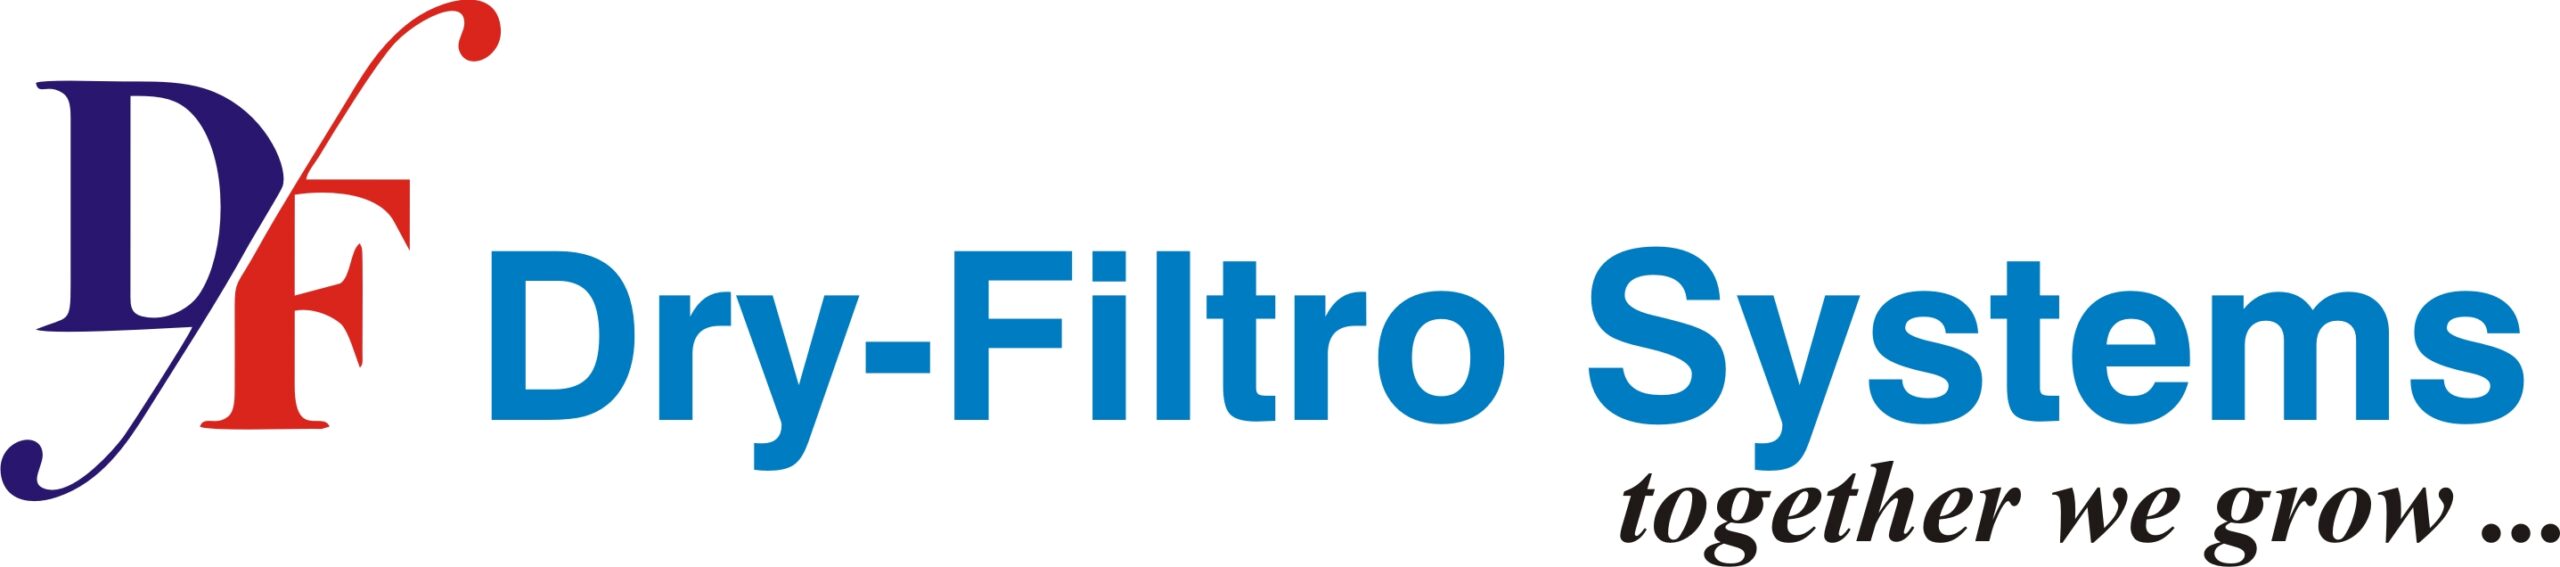 Dry Filtro Systems